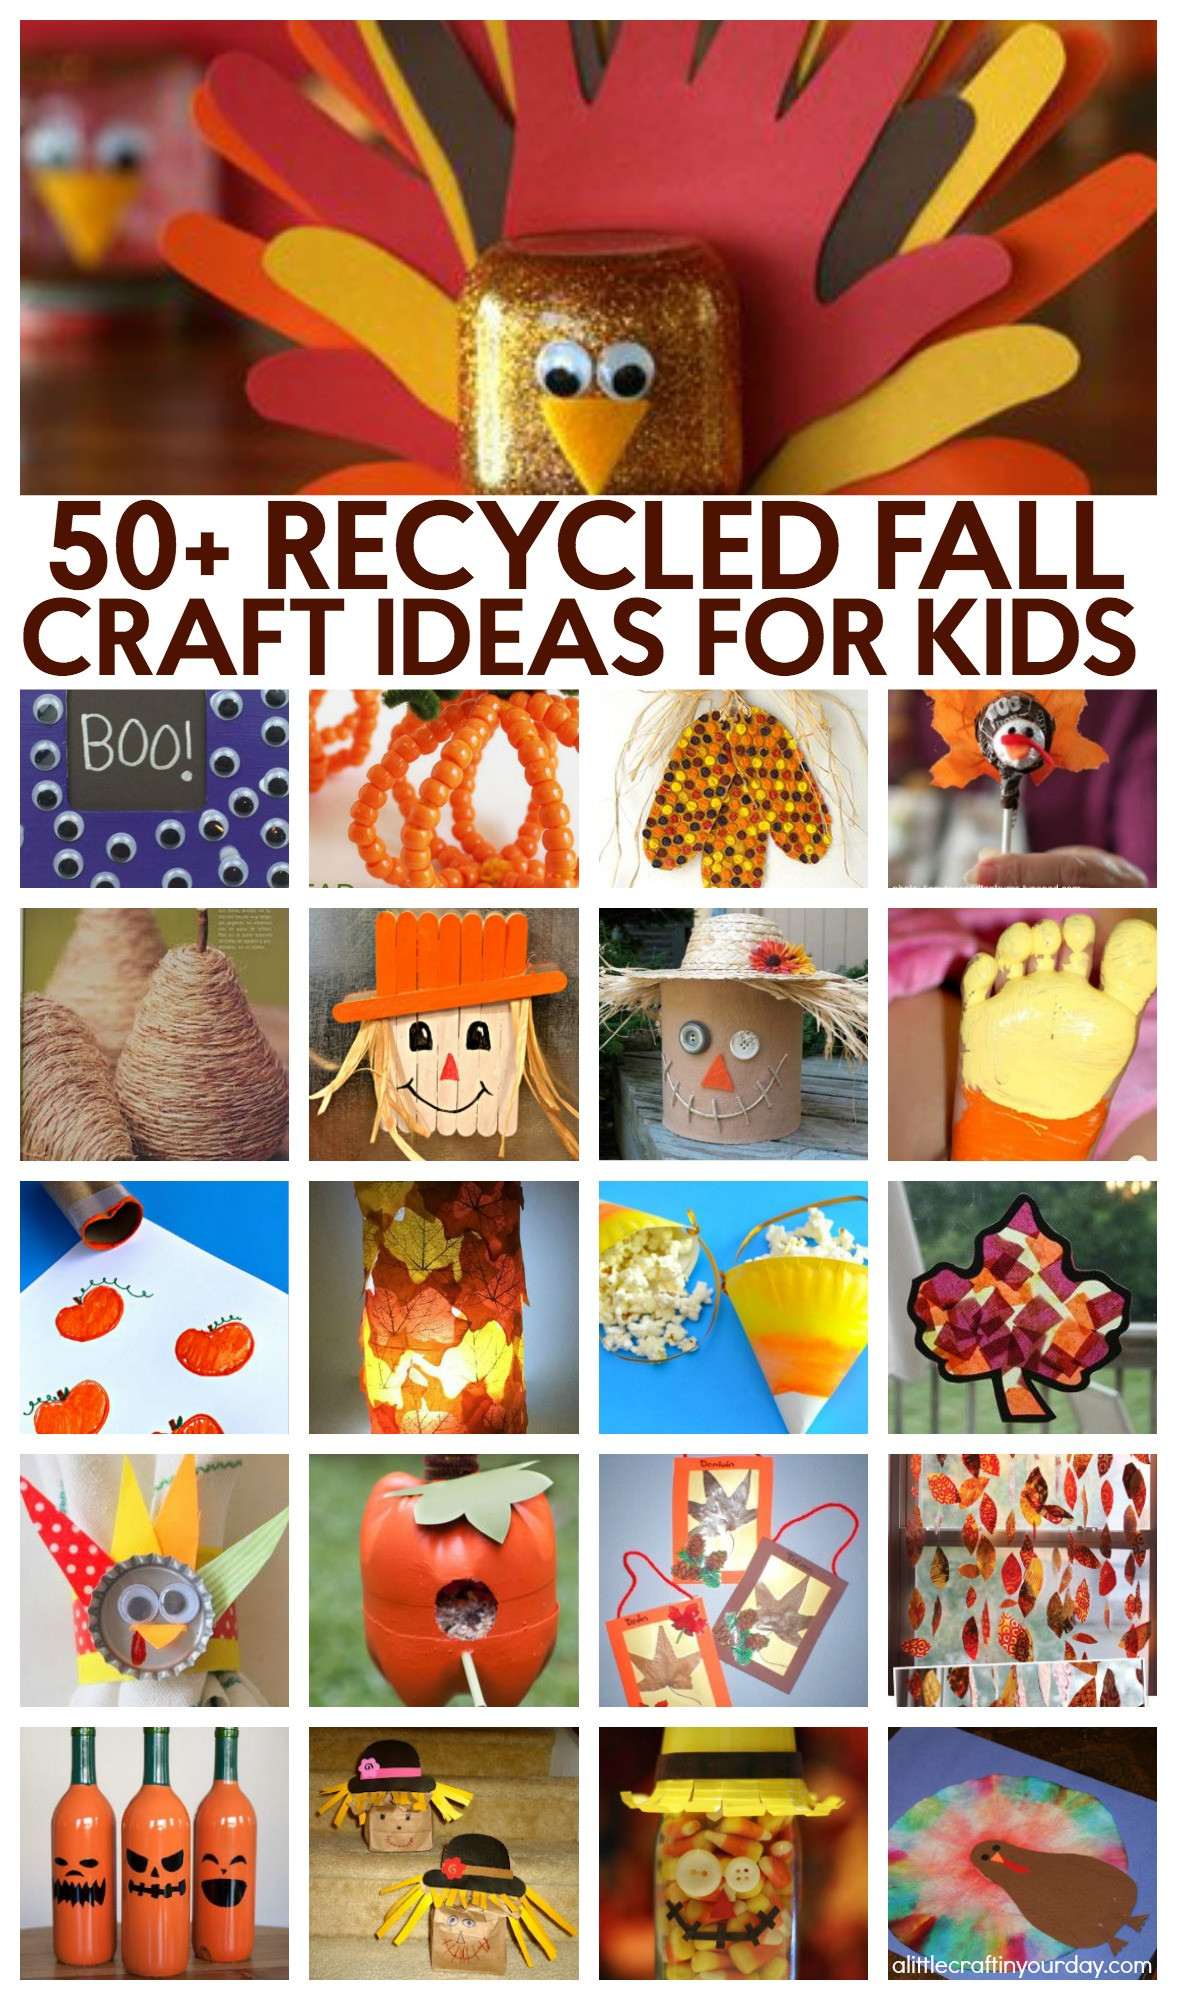 August Crafts For Toddlers
 51 Recycled Fall Kids Crafts A Little Craft In Your DayA